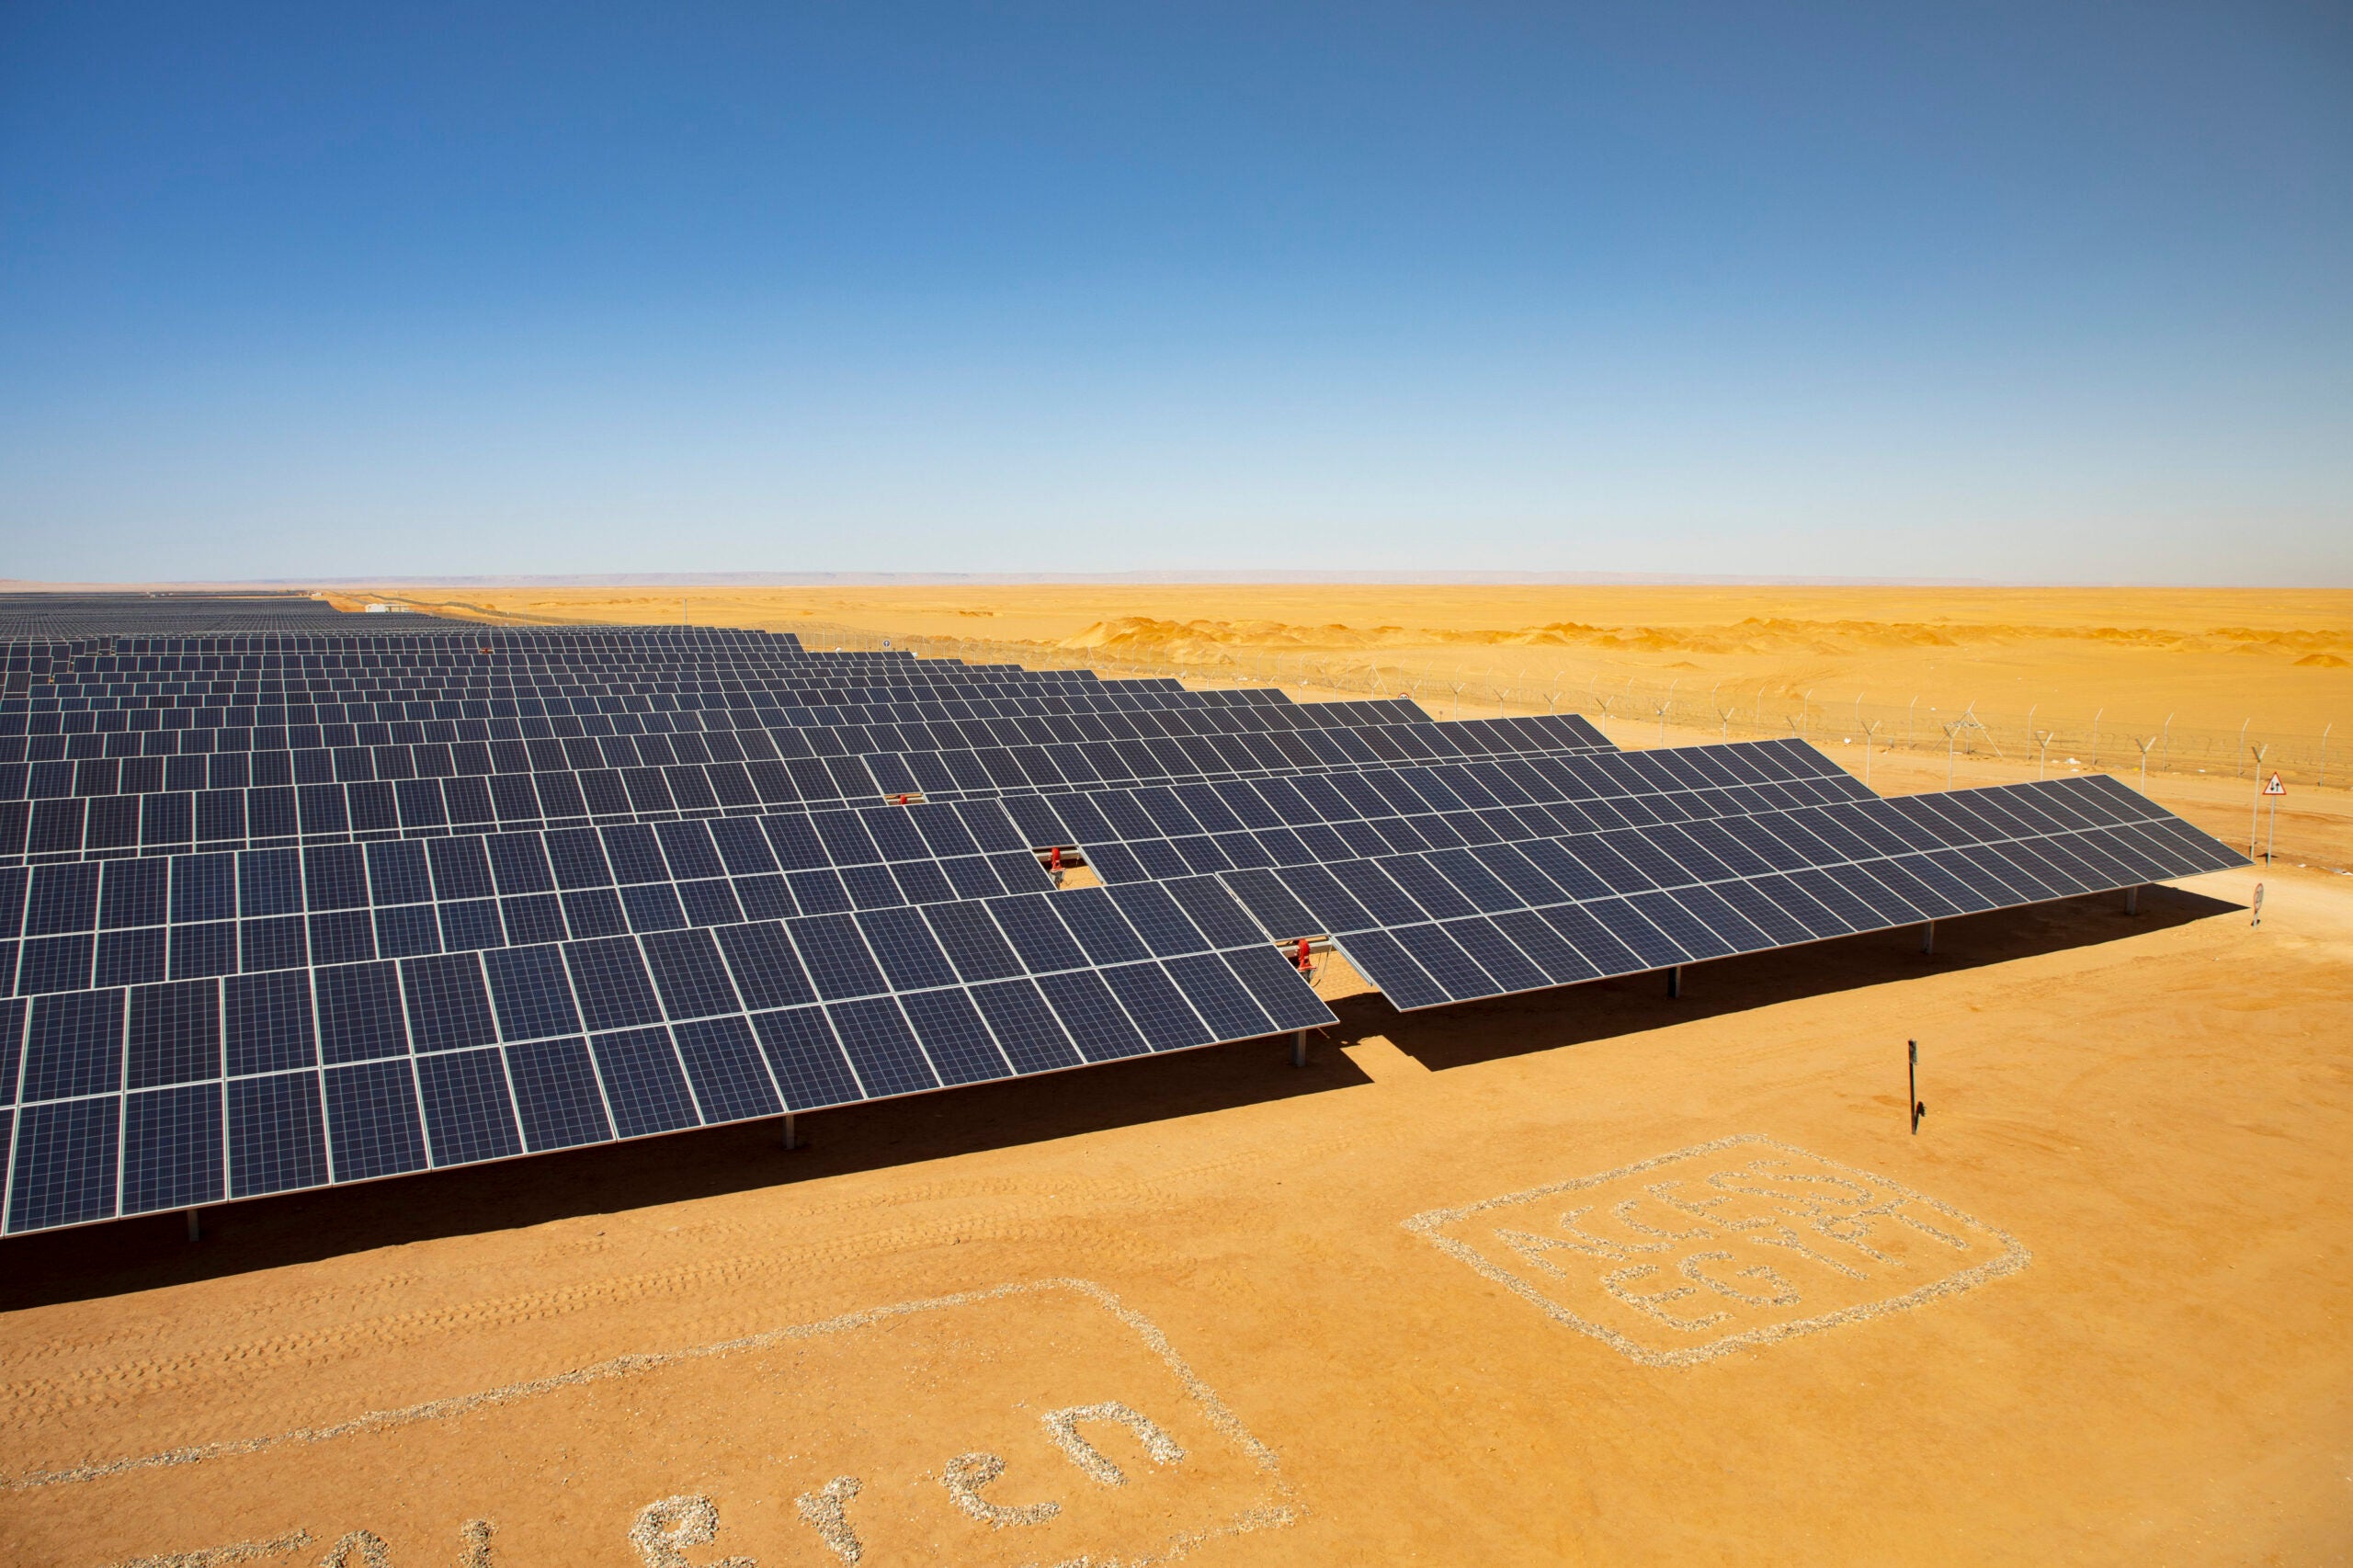 Arab states target fivefold increase in wind and solar by 2030